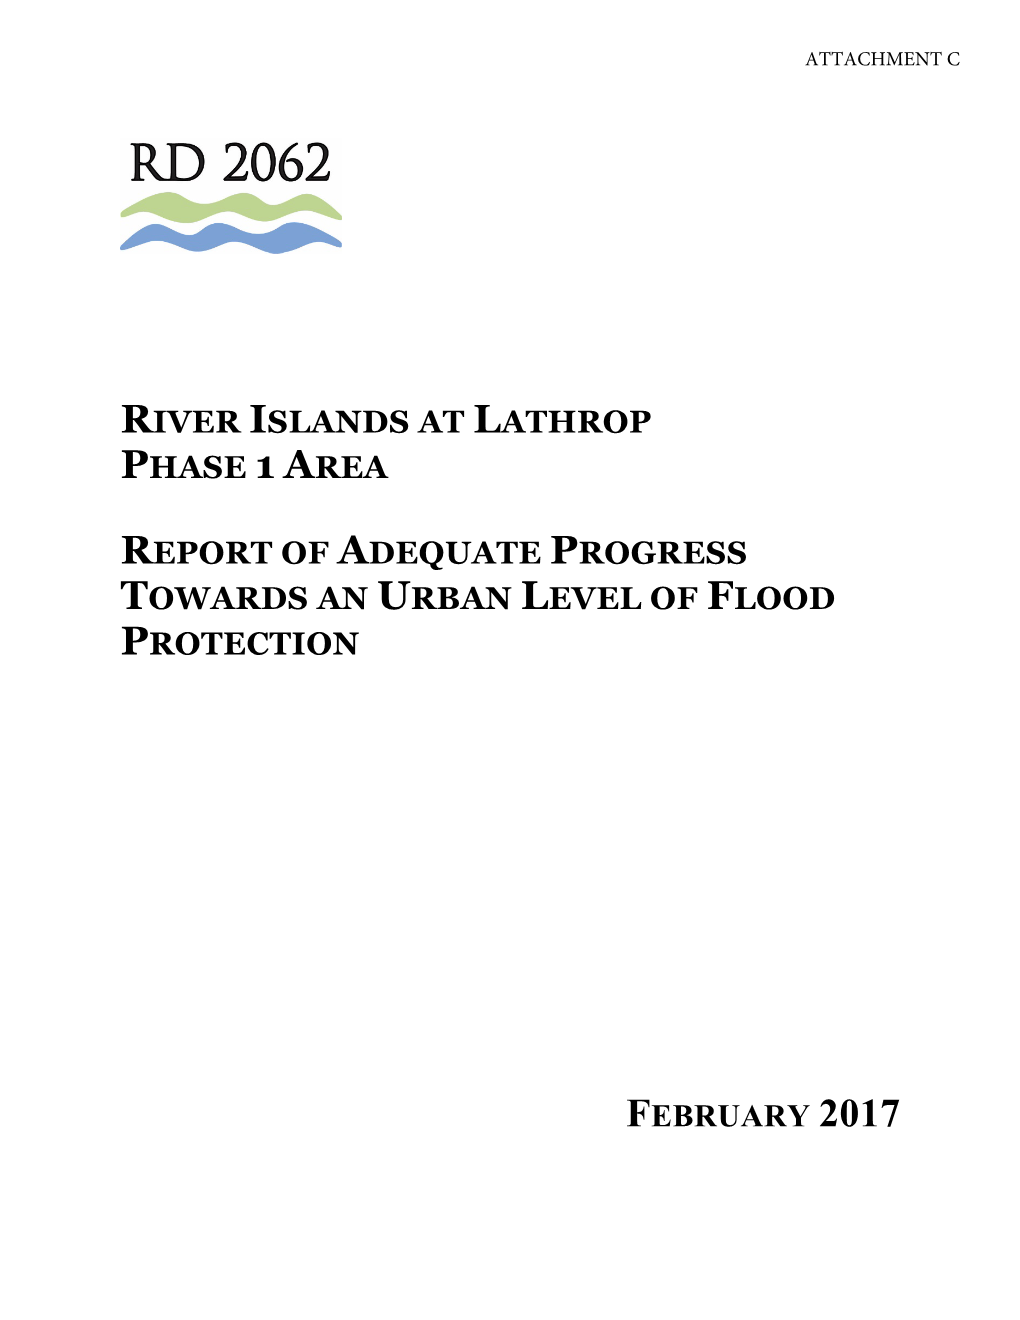 River Islands at Lathrop Phase 1 Area Report of Adequate Progress